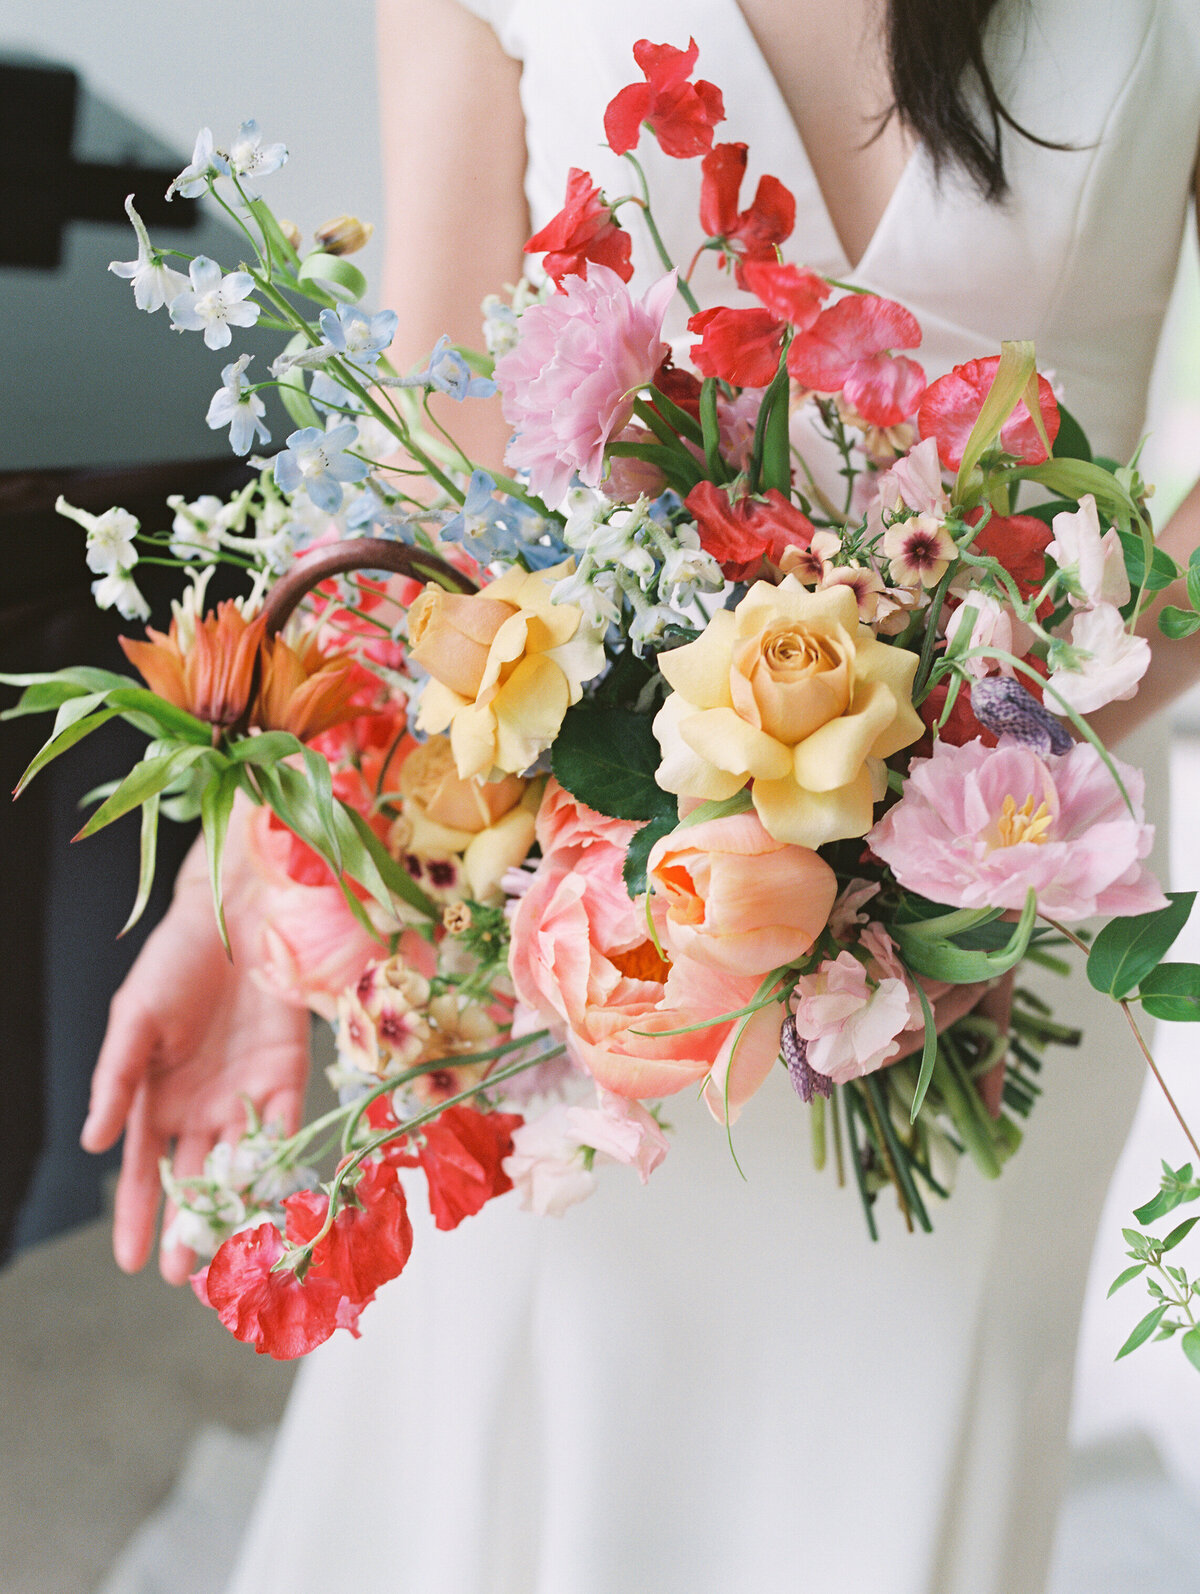 A bride holds a large bouquet of very colorful flowers in a Dutch Masters style by Anthousai Florals, in Tulsa.